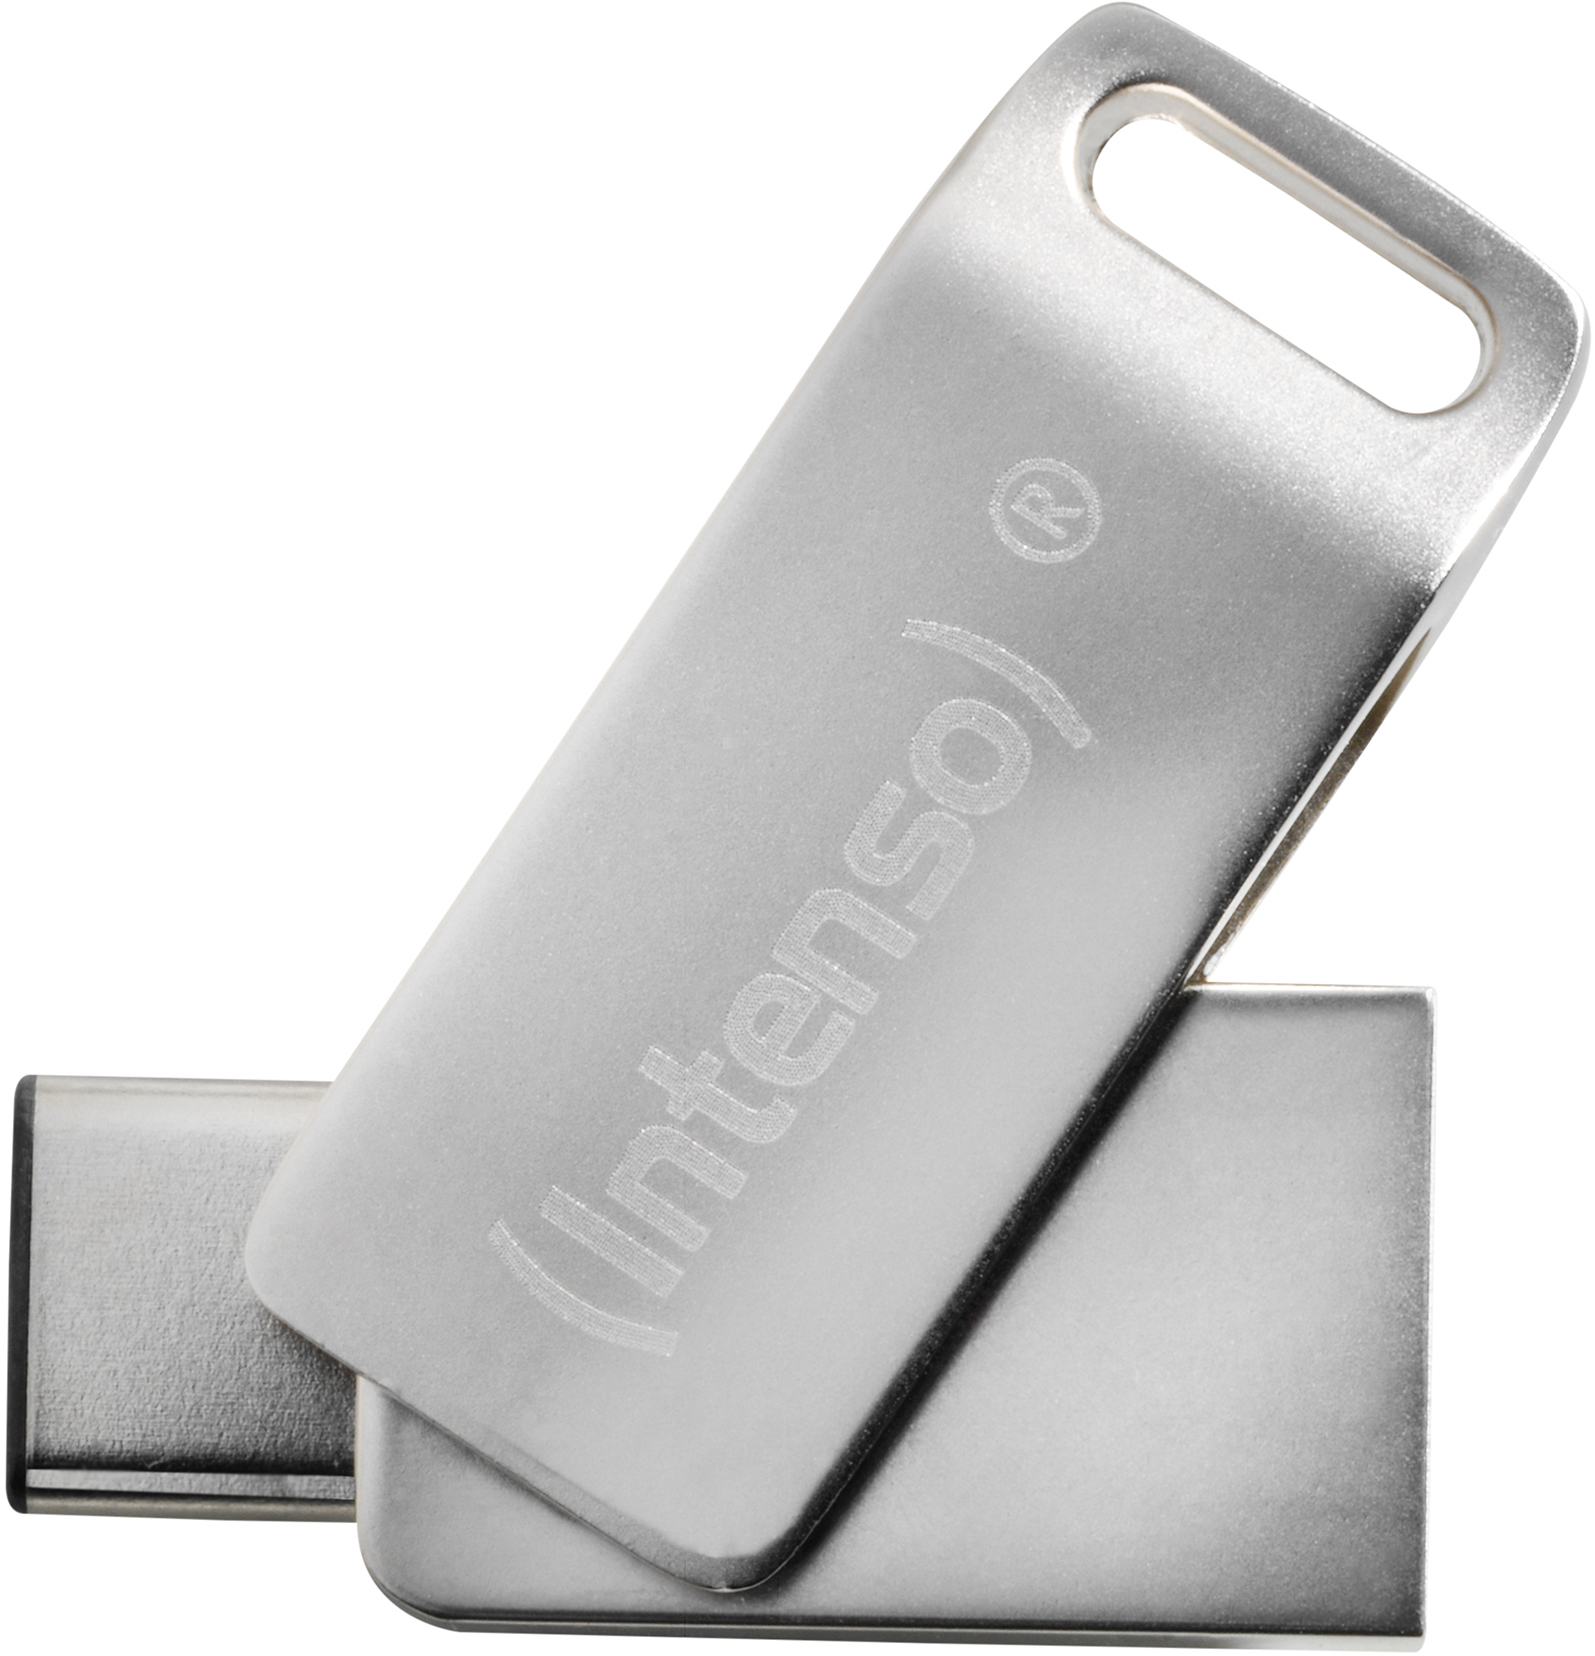 70 LINE USB-Stick, MB/s, Silber INTENSO 64 GB, CMOBILE